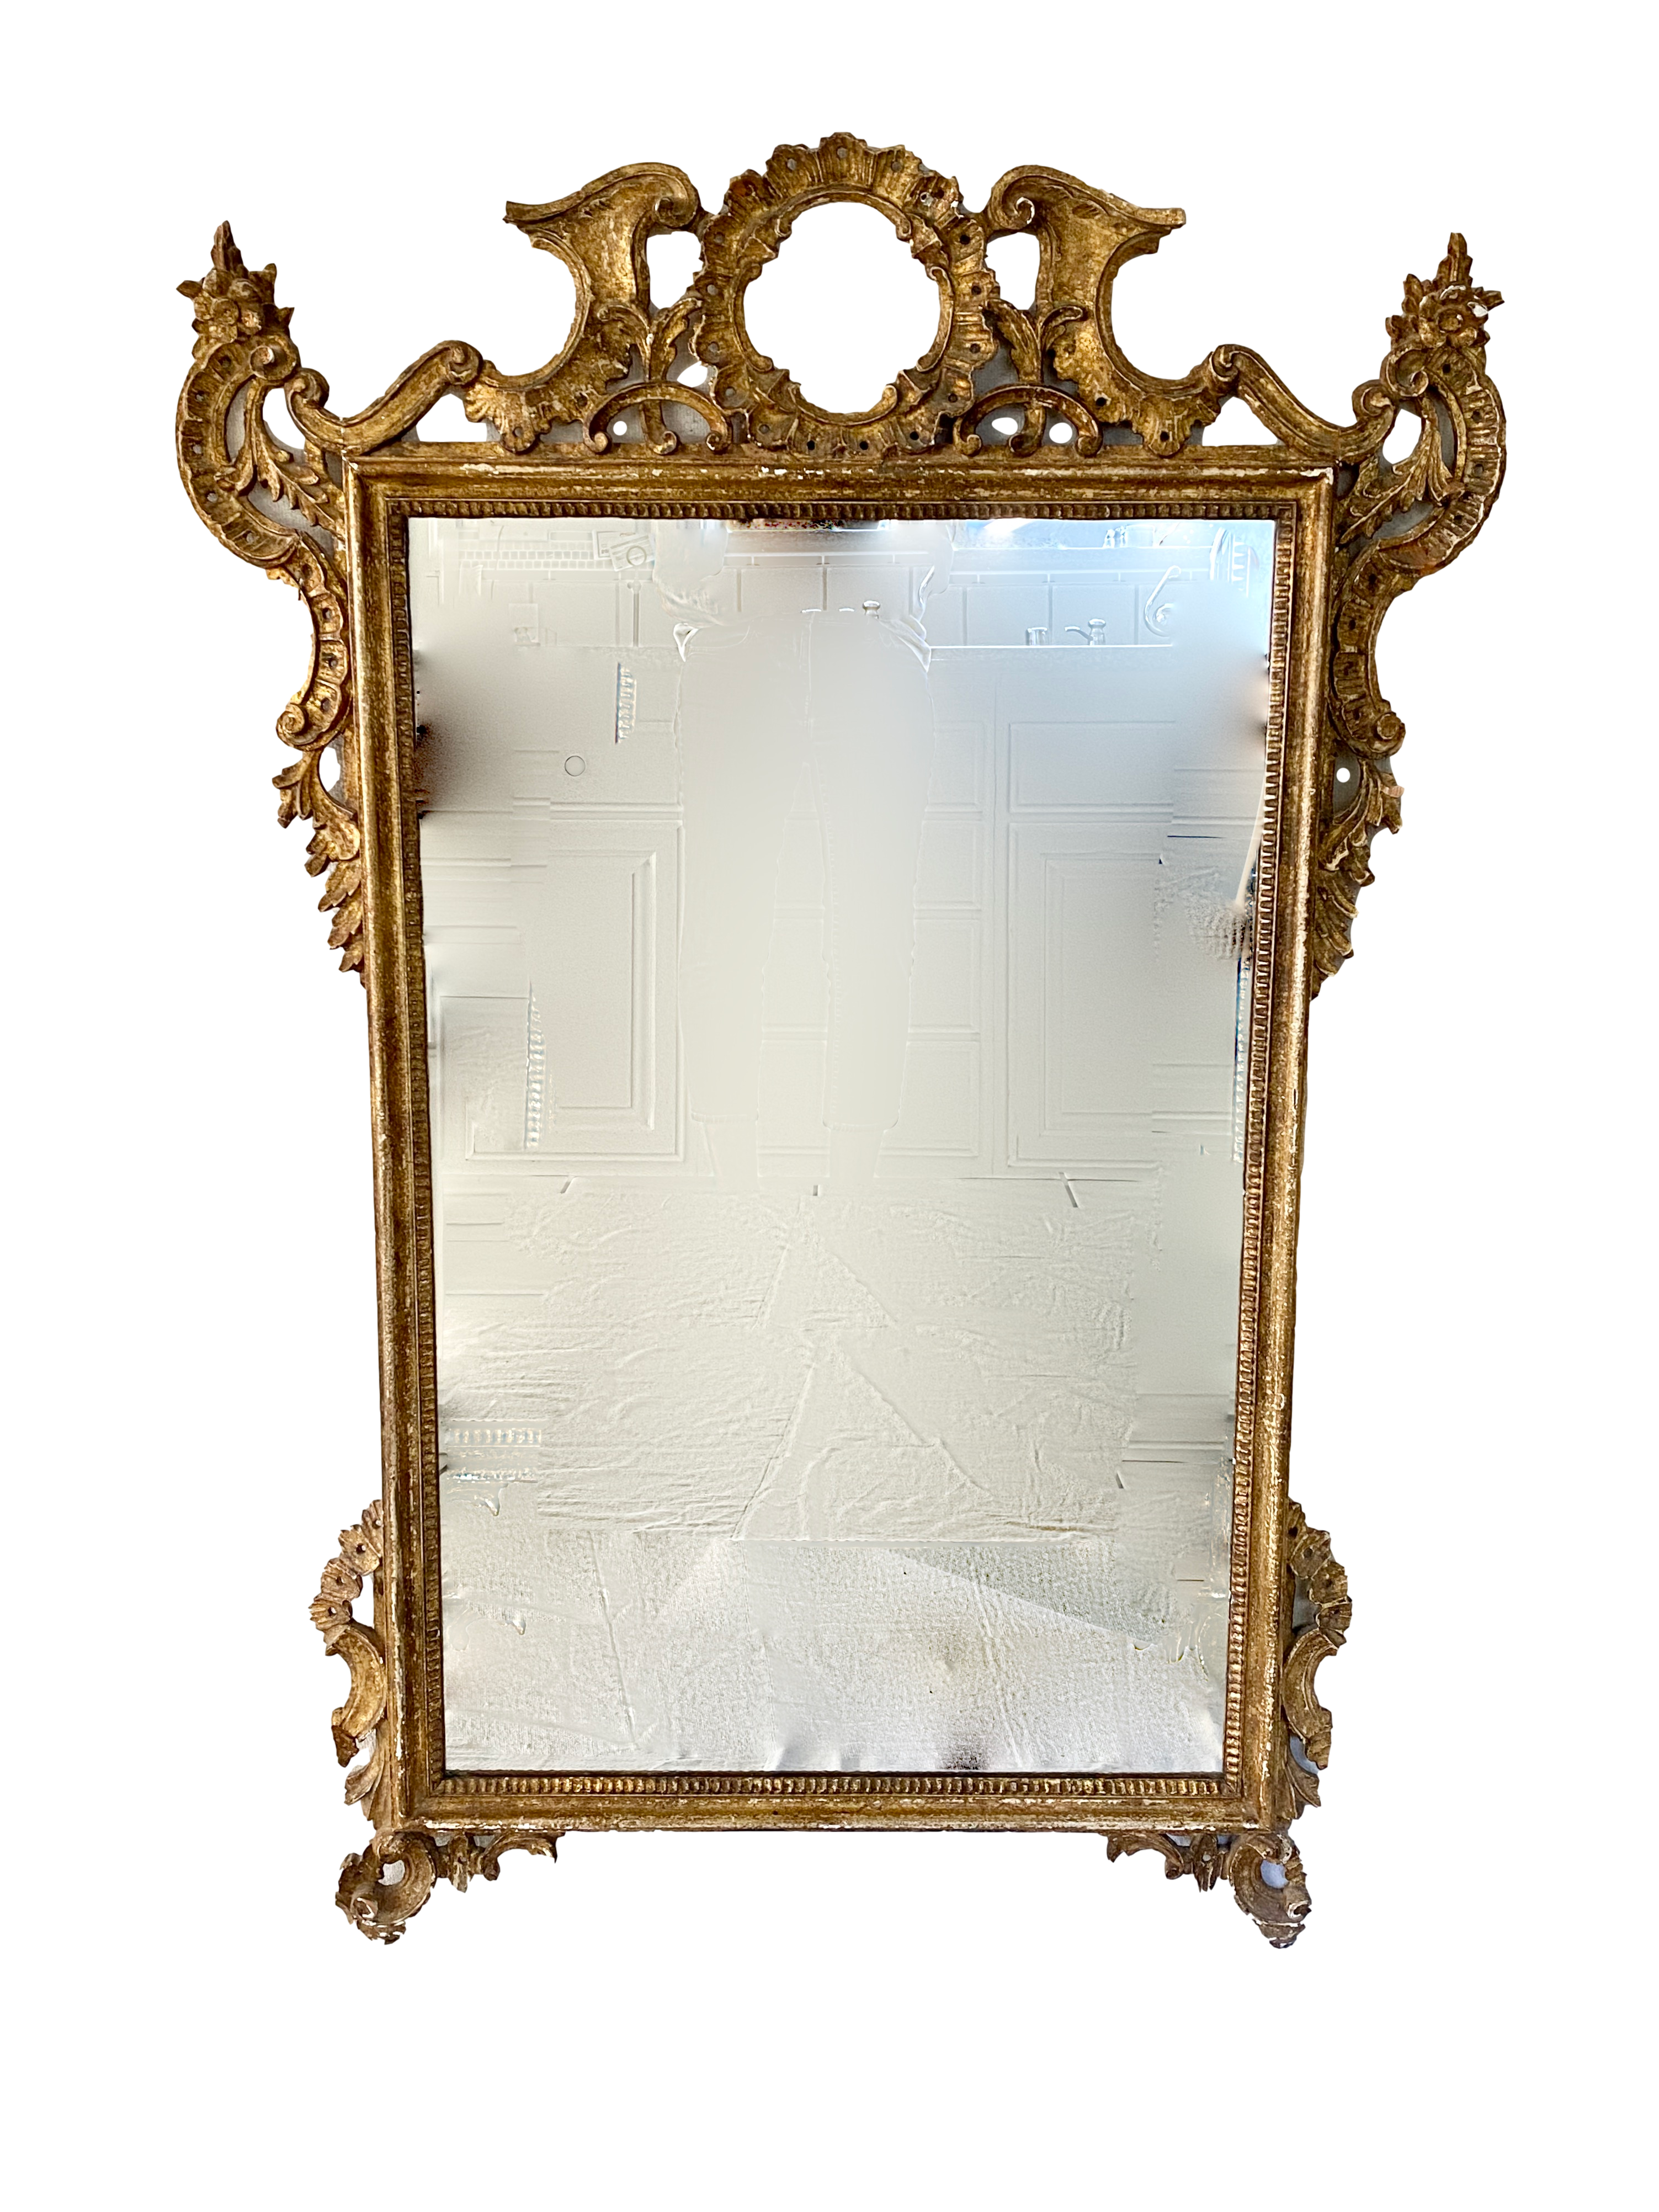 Antique Gold Louis XIII Wall Mirror~P77663840